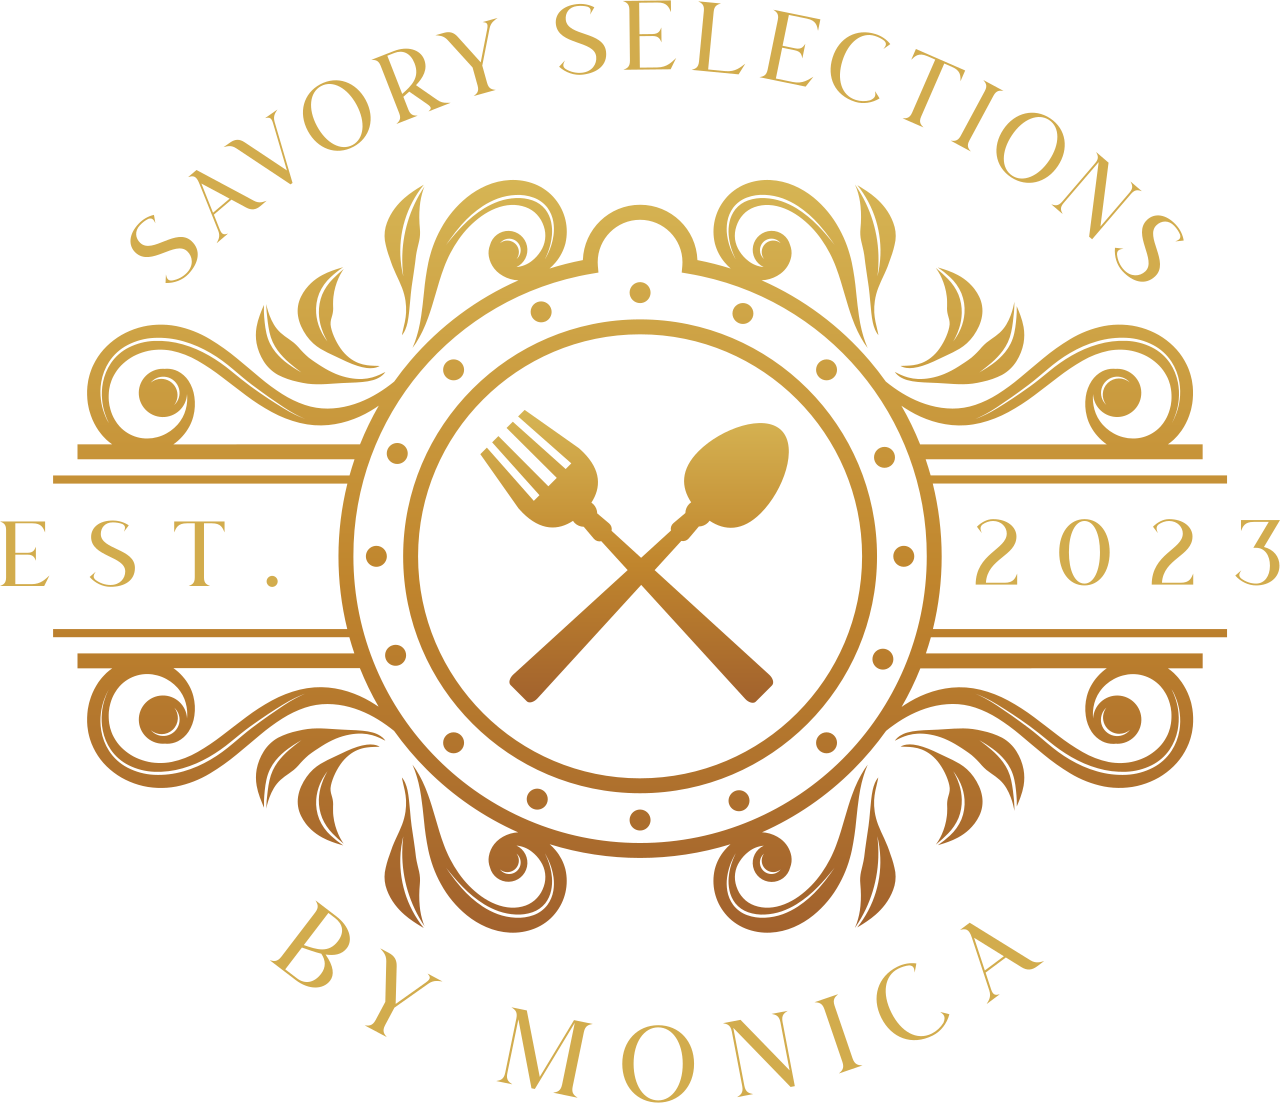 Savory Selections By Monica's logo